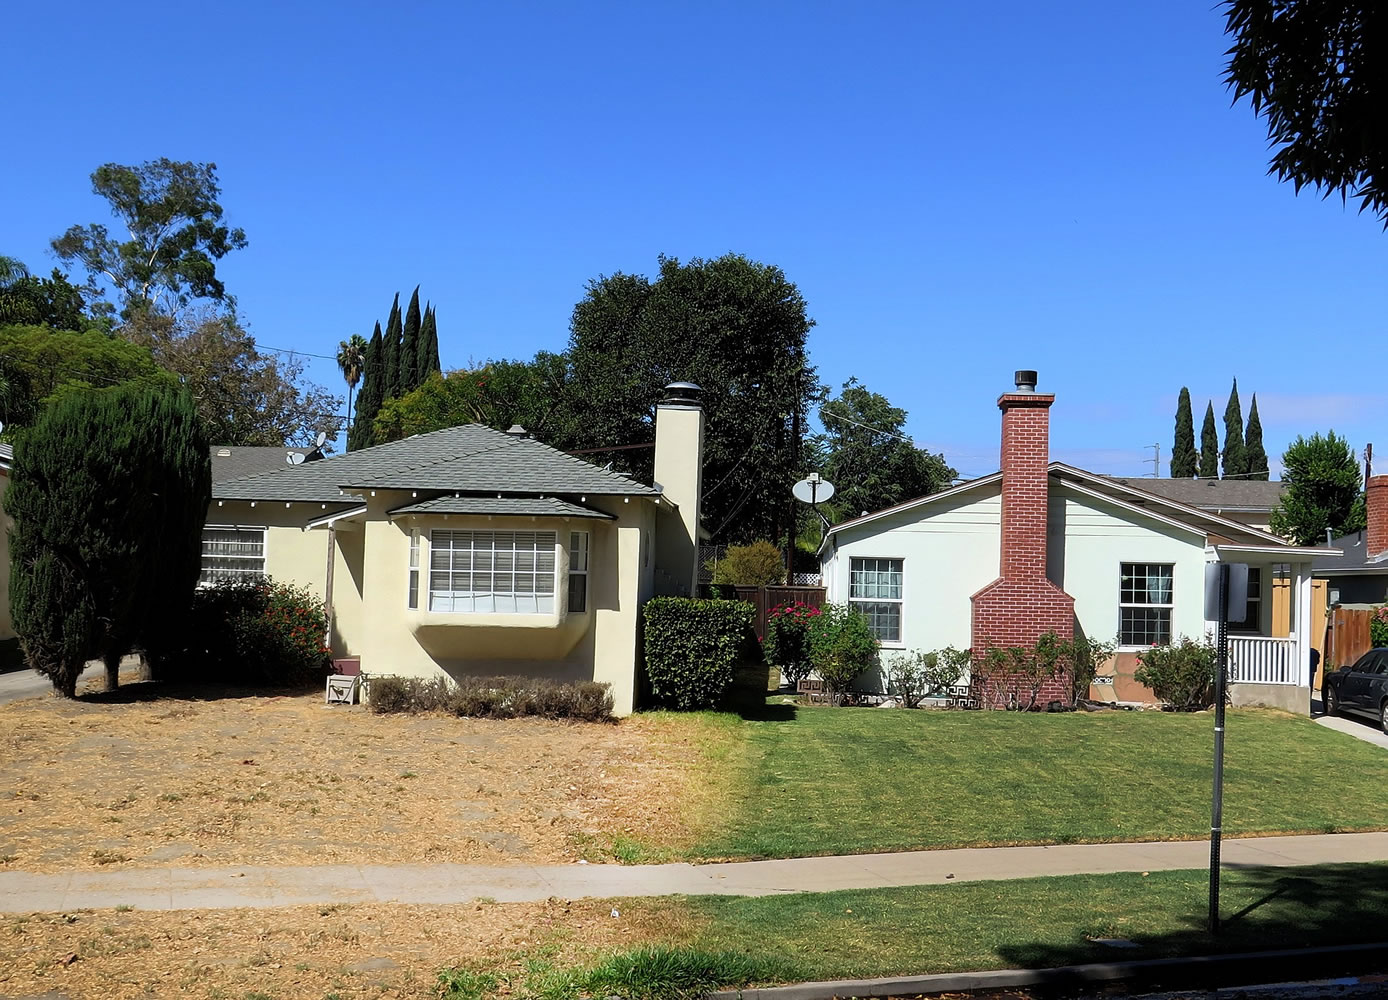 Two homes sit along Valleyheart Drive, in Studio City, Calif.